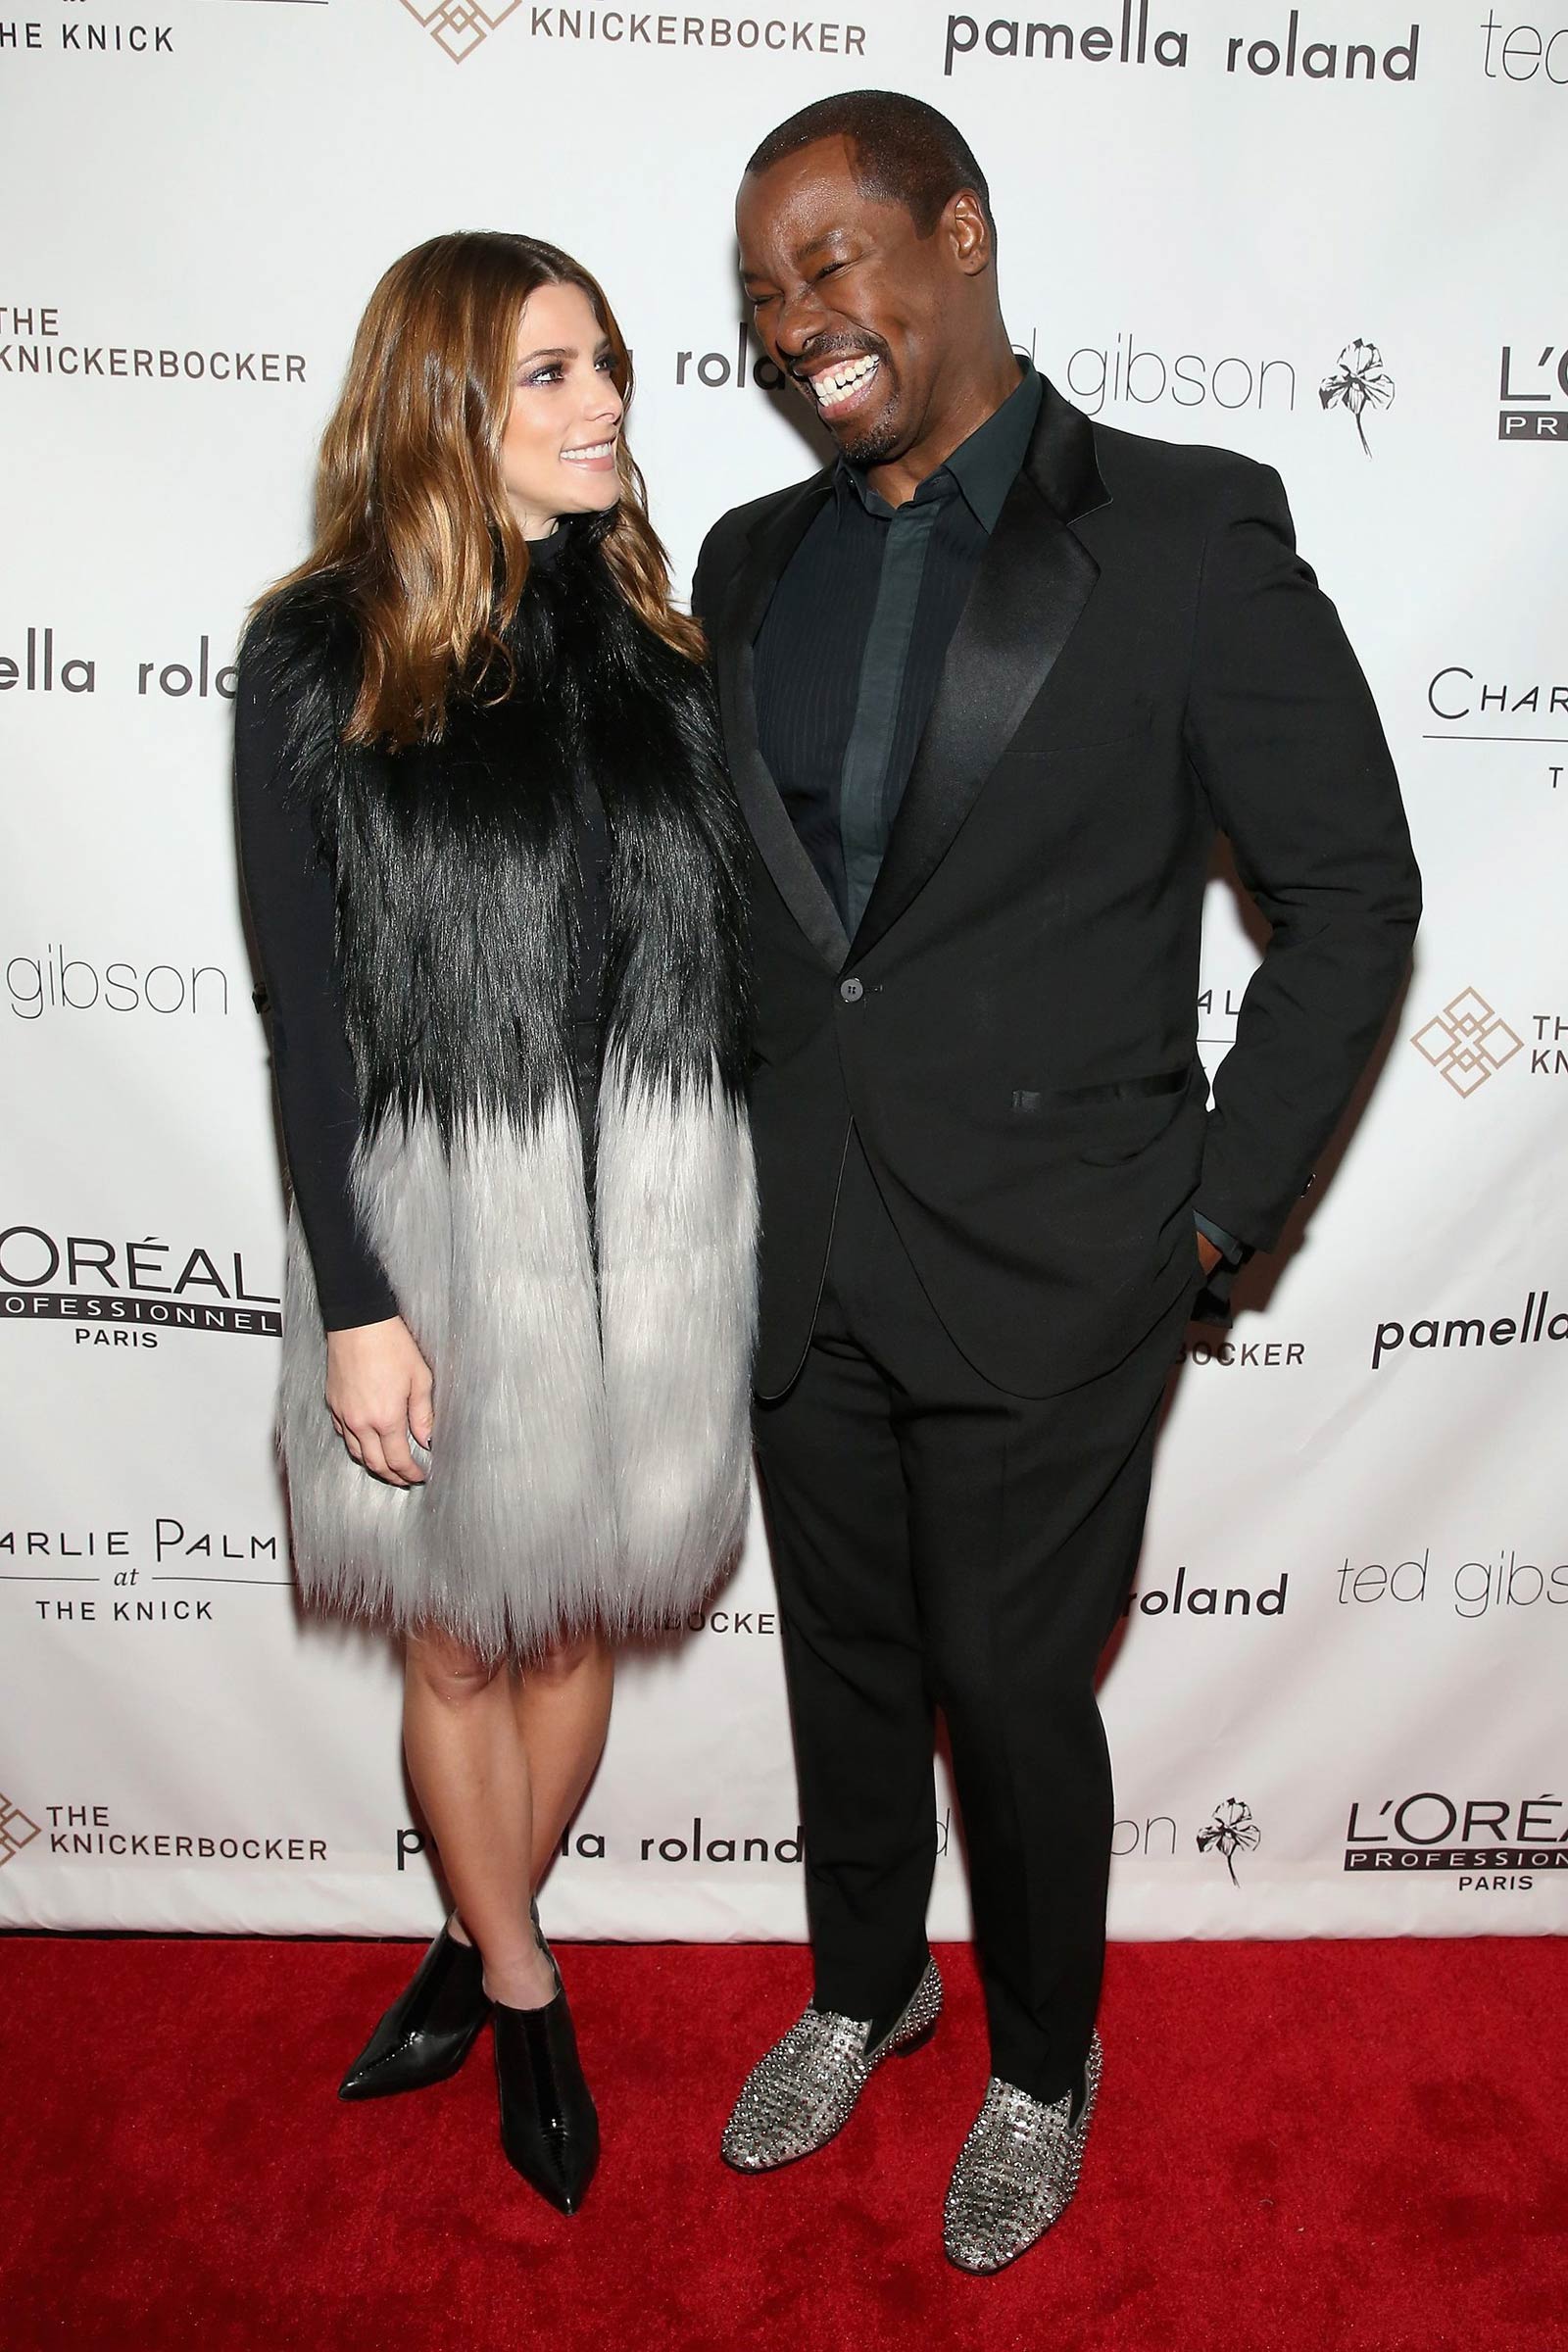 Ashley Greene attends Ted Gibson’s 50th Birthday Celebration